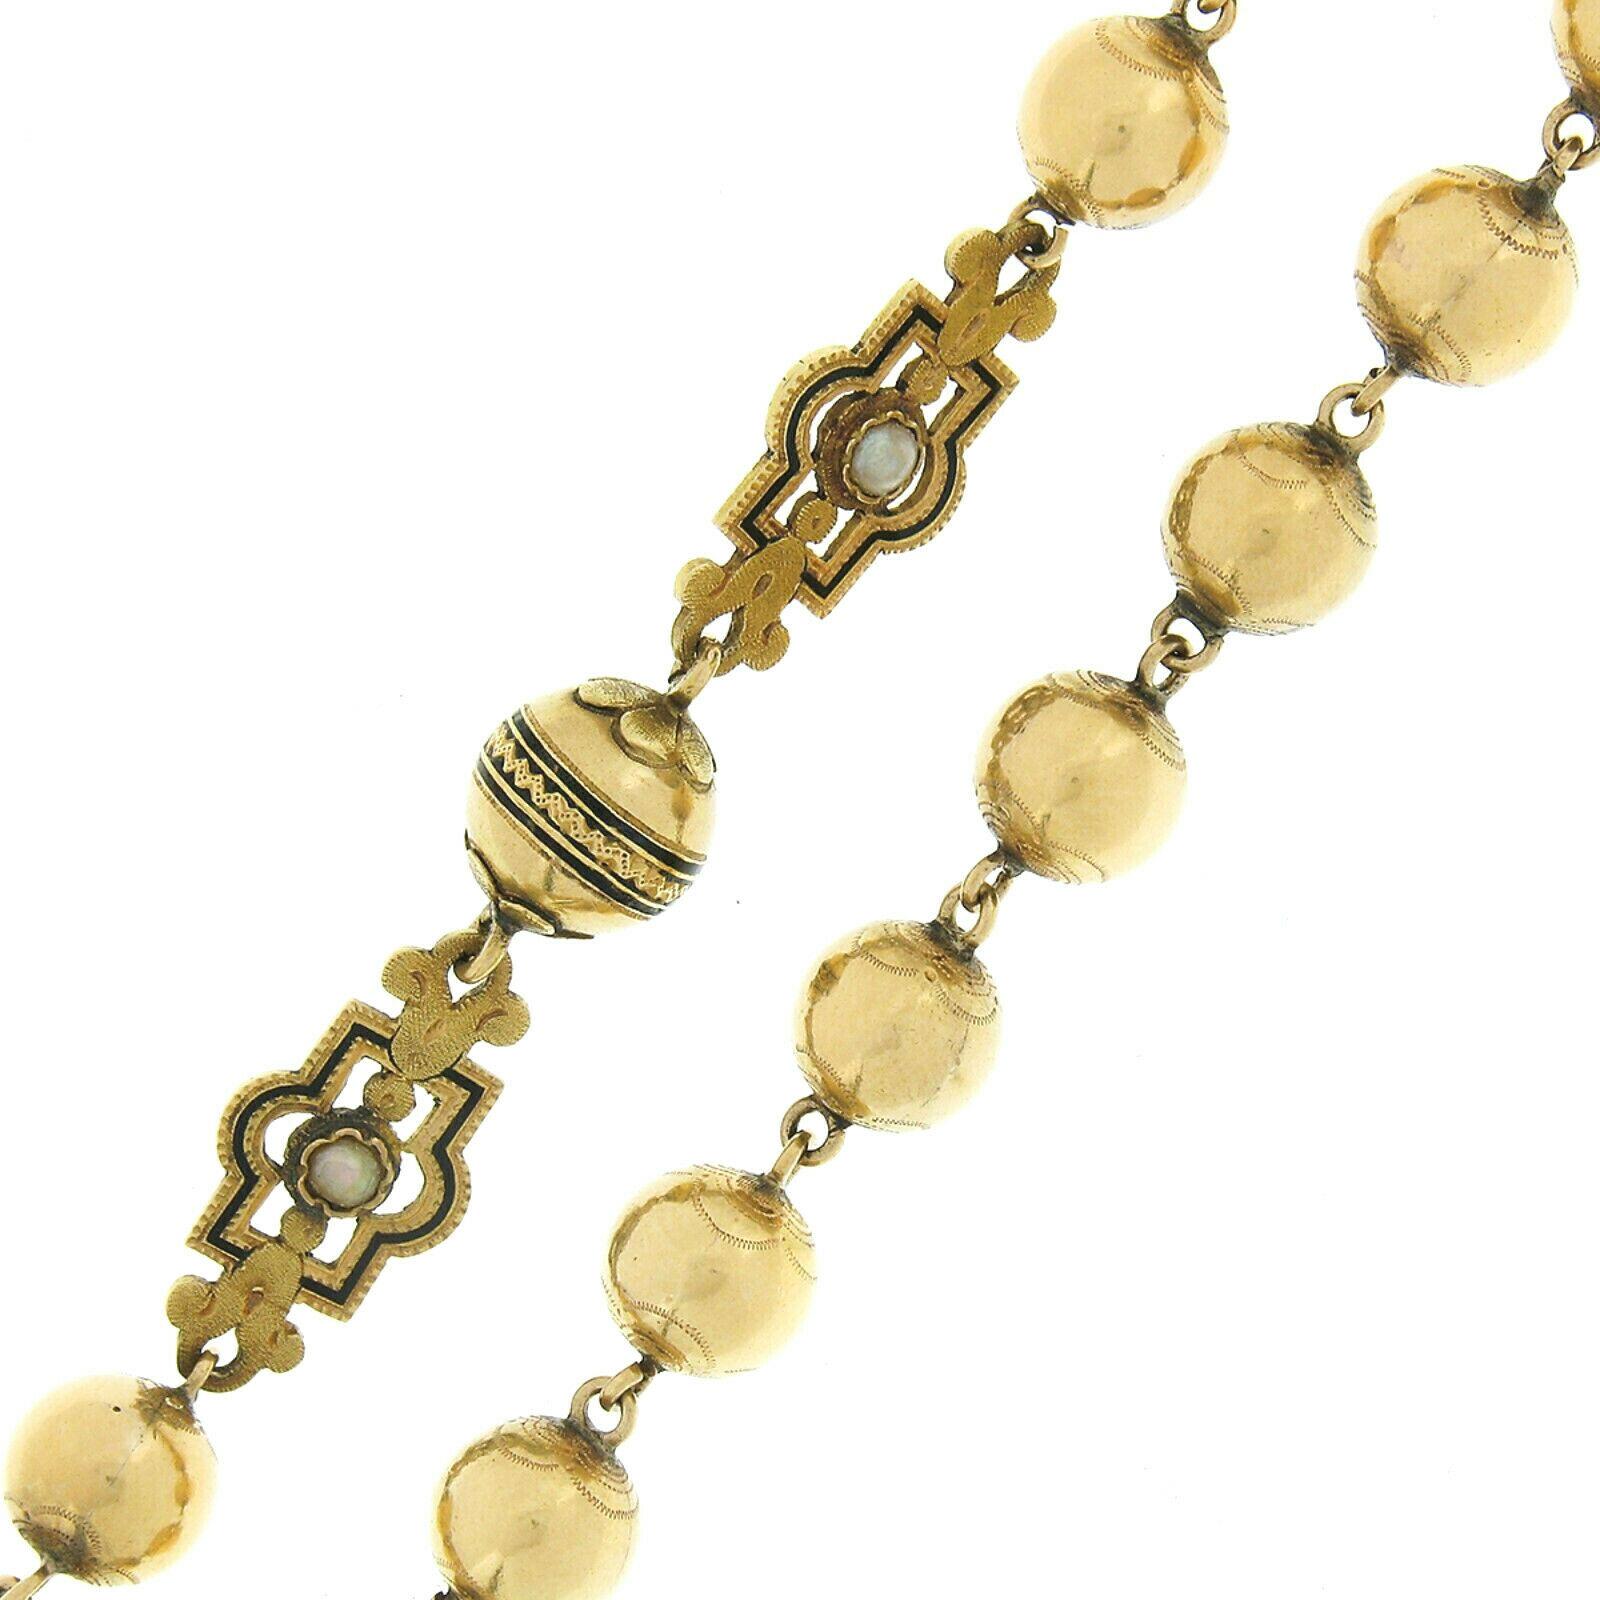 Women's or Men's Large Antique 18K Gold Seed Pearl Etched Bead Enamel Rosary Cross Chain Necklace